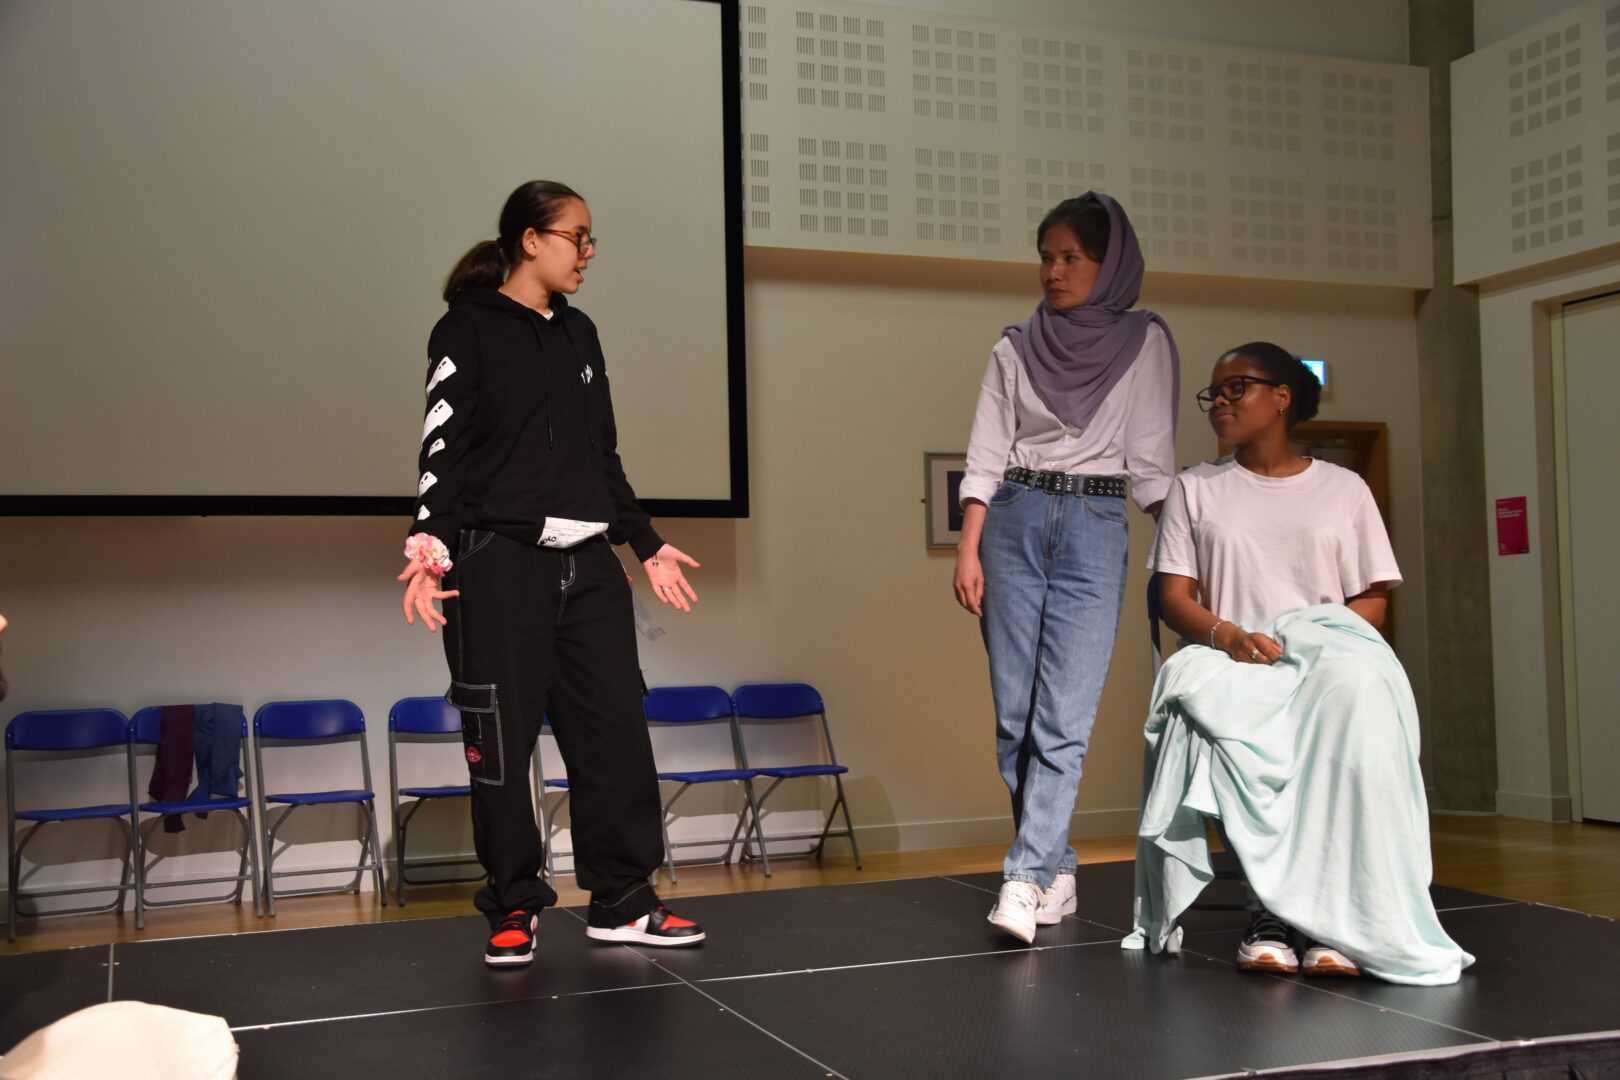 a group of 3 esol students stood on stage performing